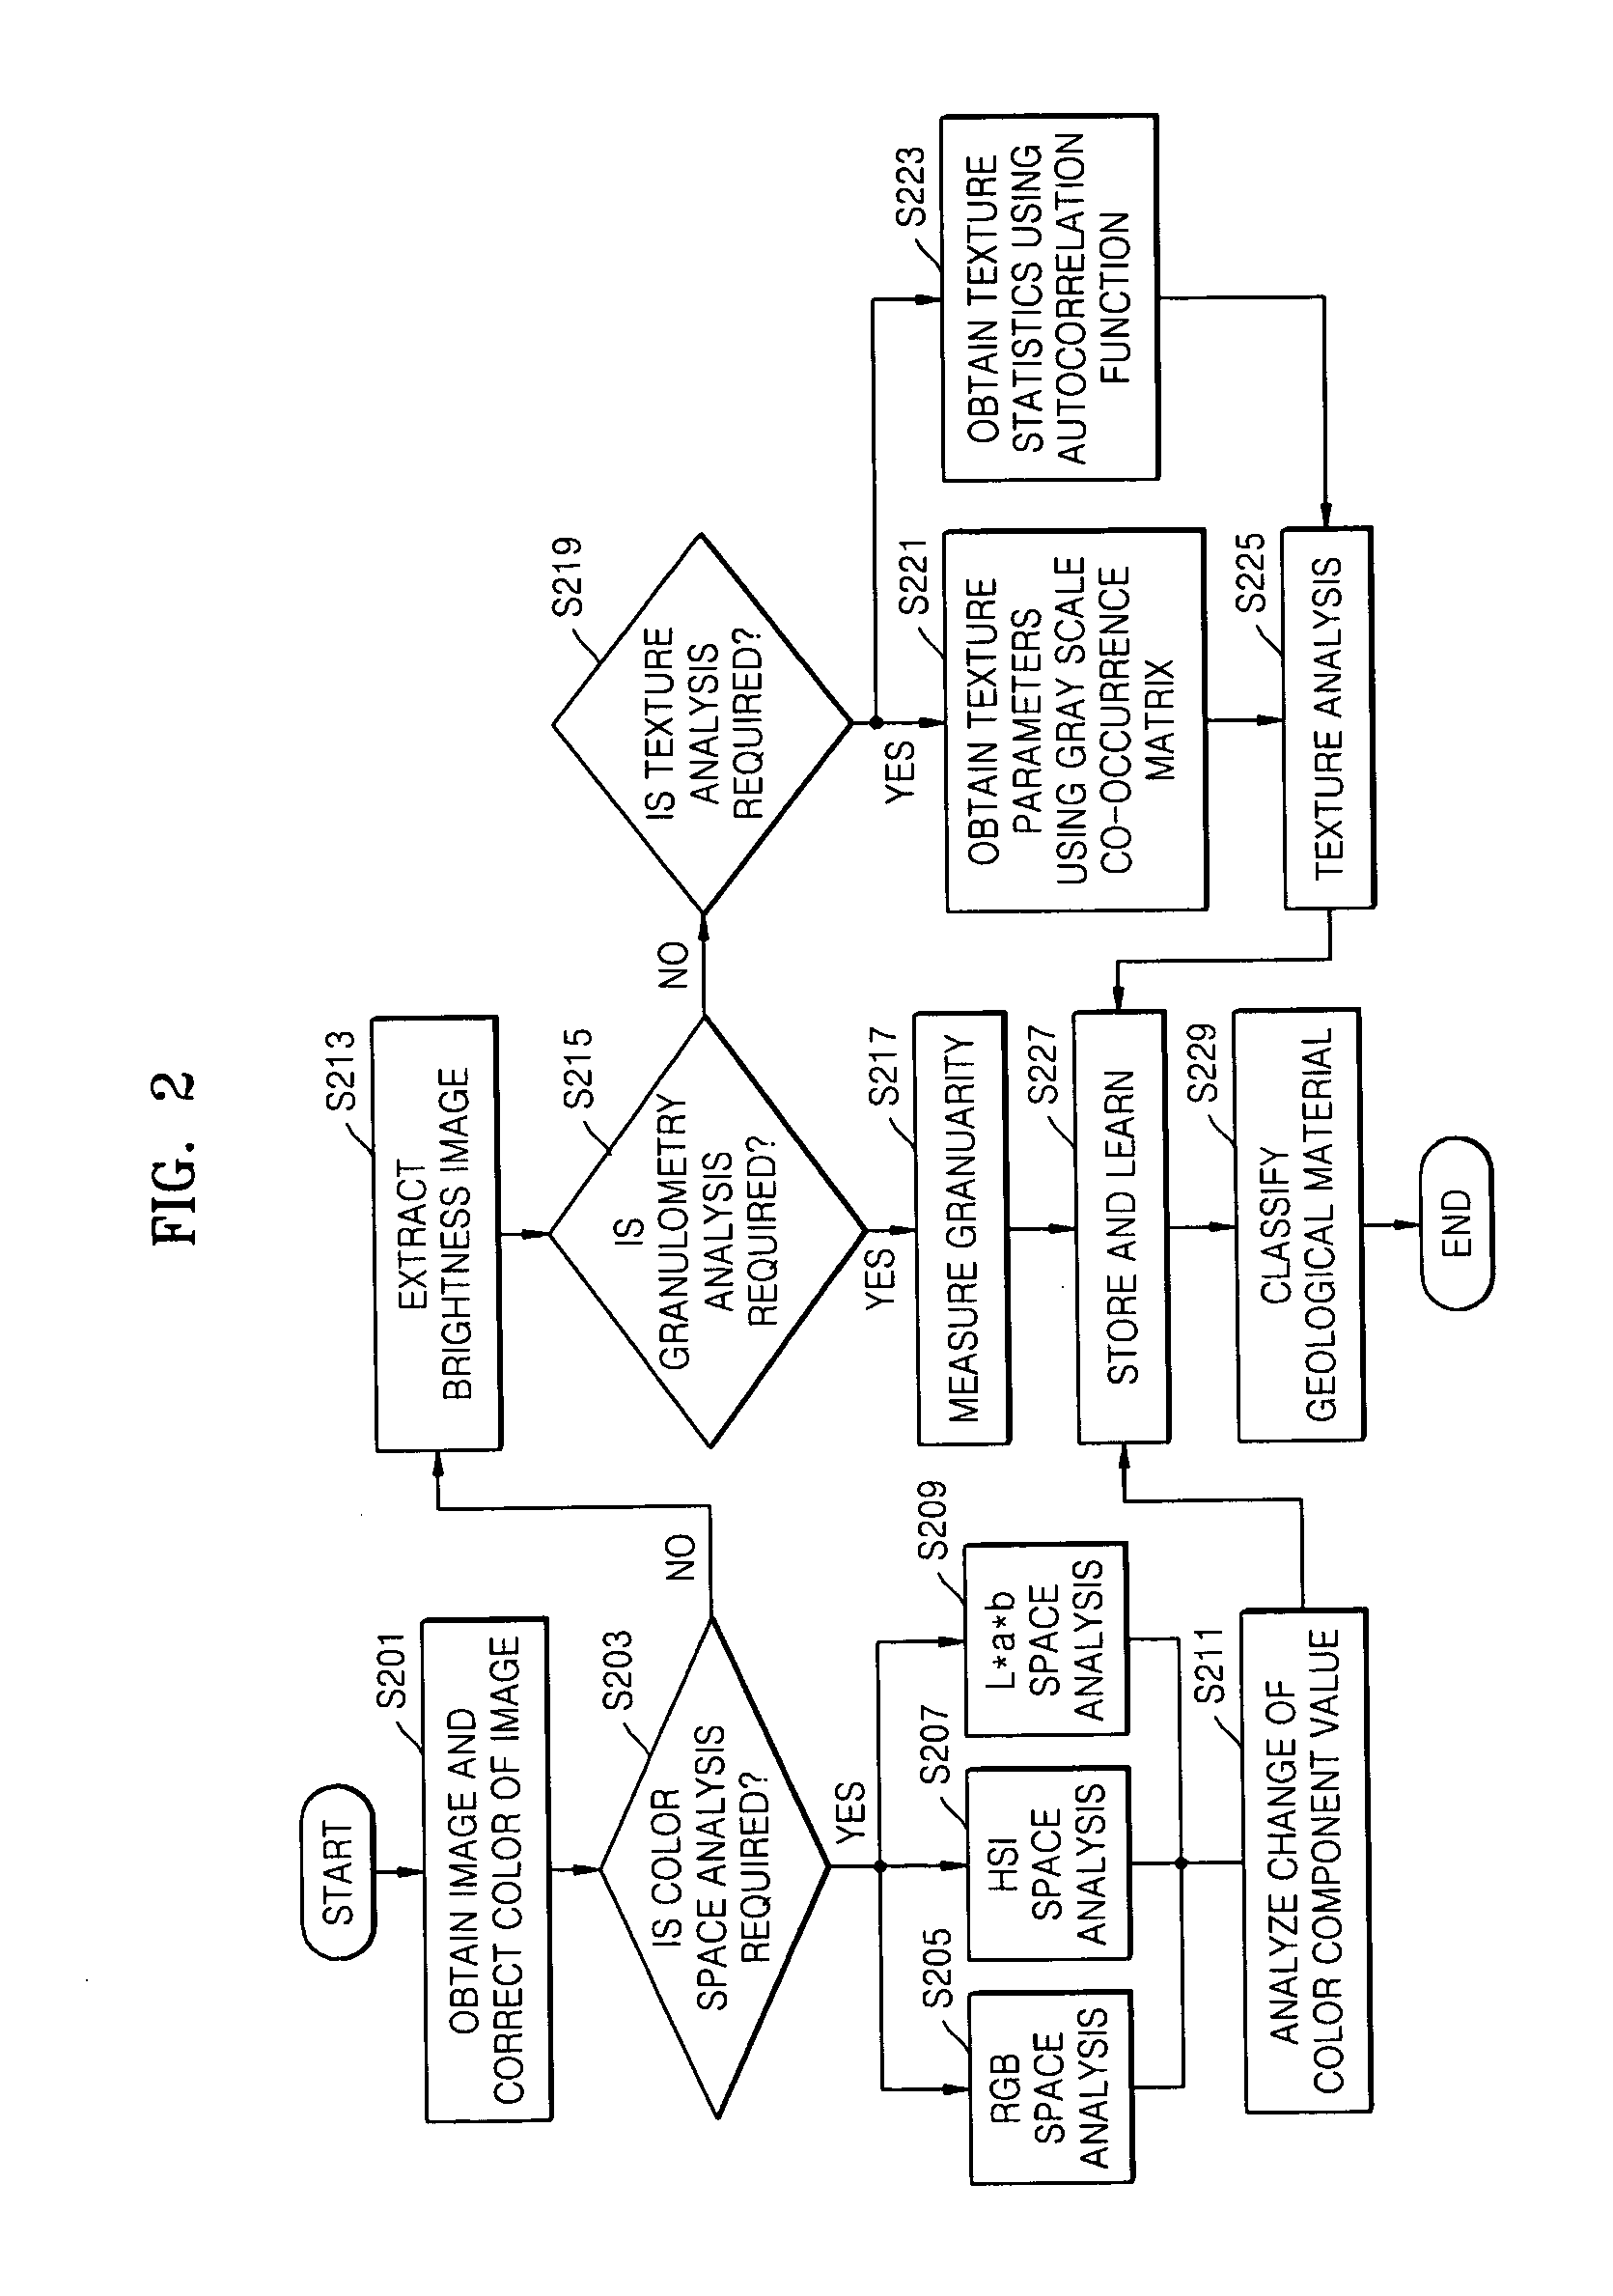 Method and apparatus for classifying geological materials using image processing techniques